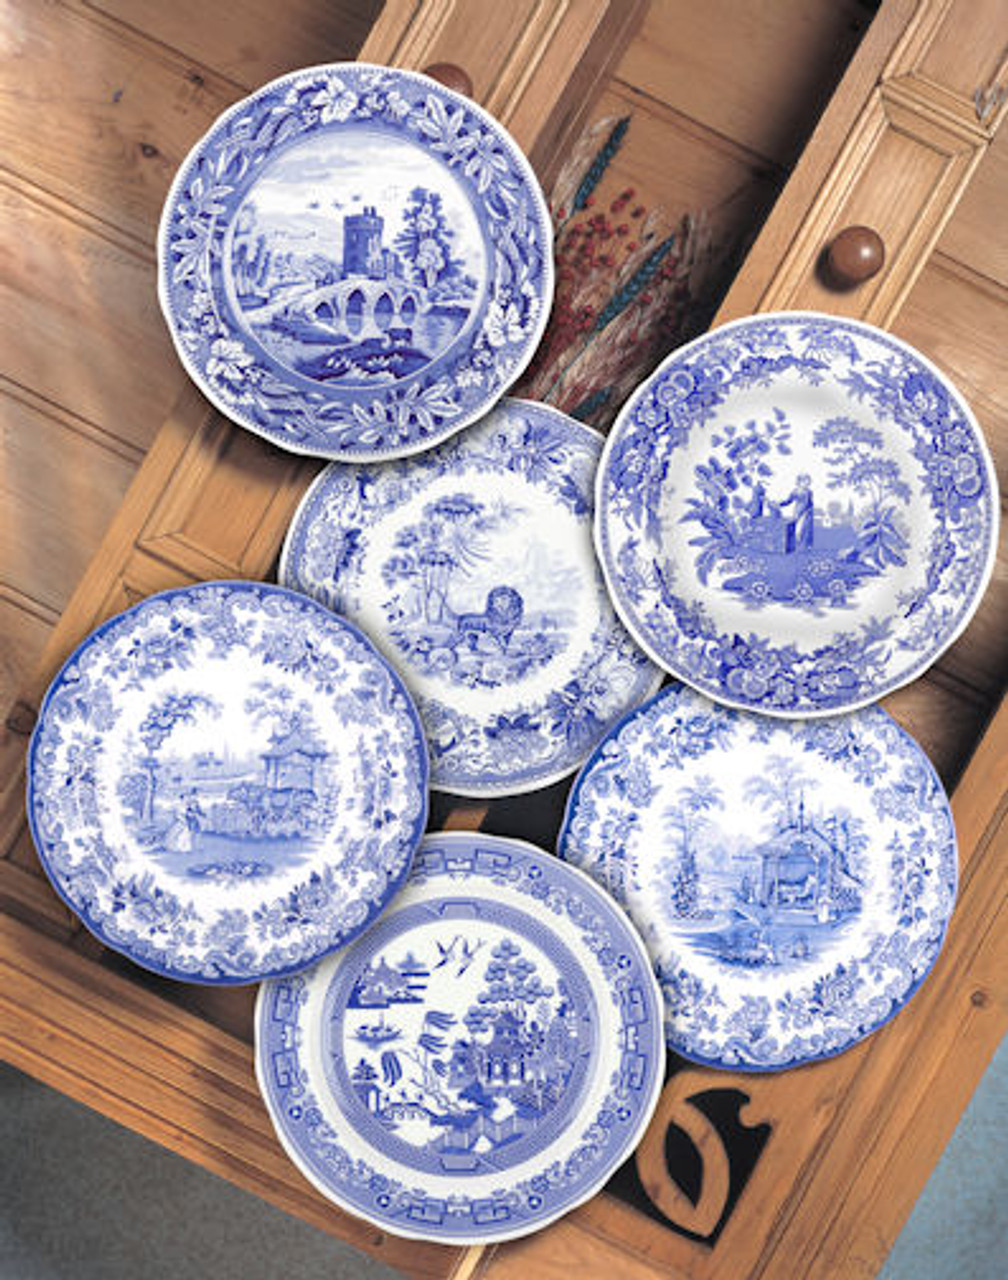 https://cdn11.bigcommerce.com/s-e0xlh4avpe/images/stencil/1280x1280/products/111022/146822/spode-blue-room-10-5-traditions-scenes-plates-set-of-6-41__52147.1650941752.jpg?c=1